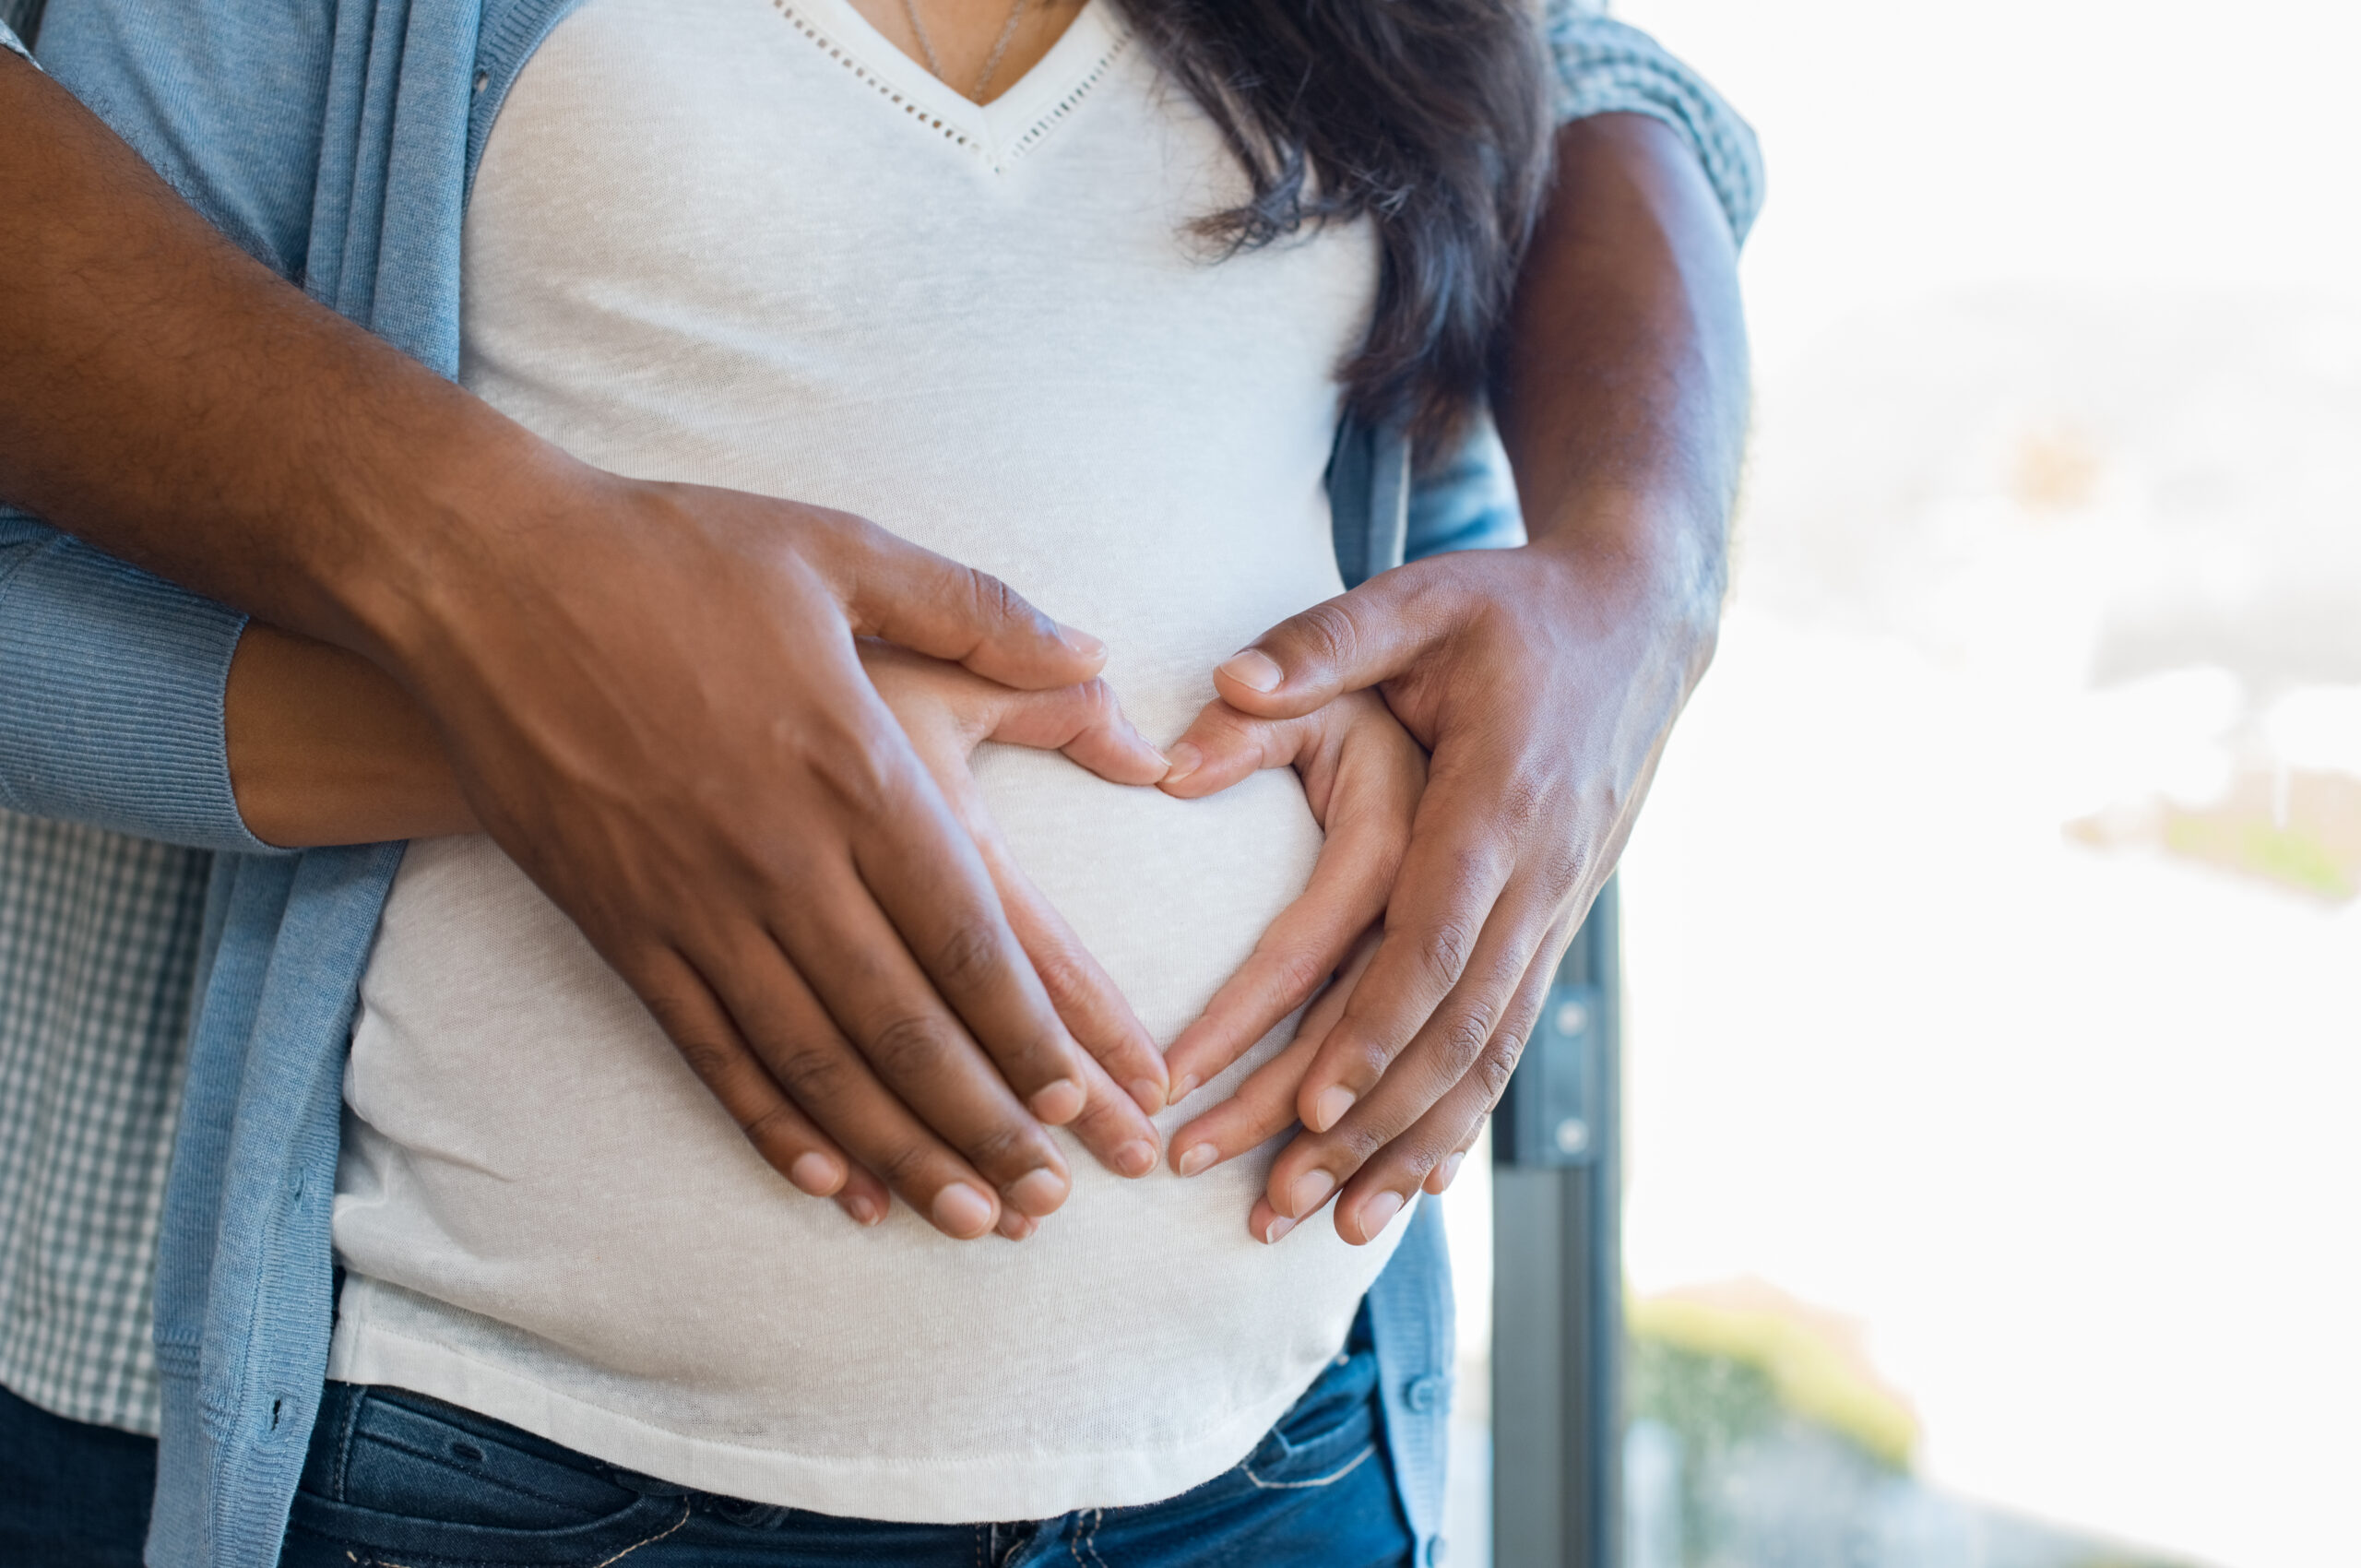 pregnant woman and heart hands - doula interview questions to ask